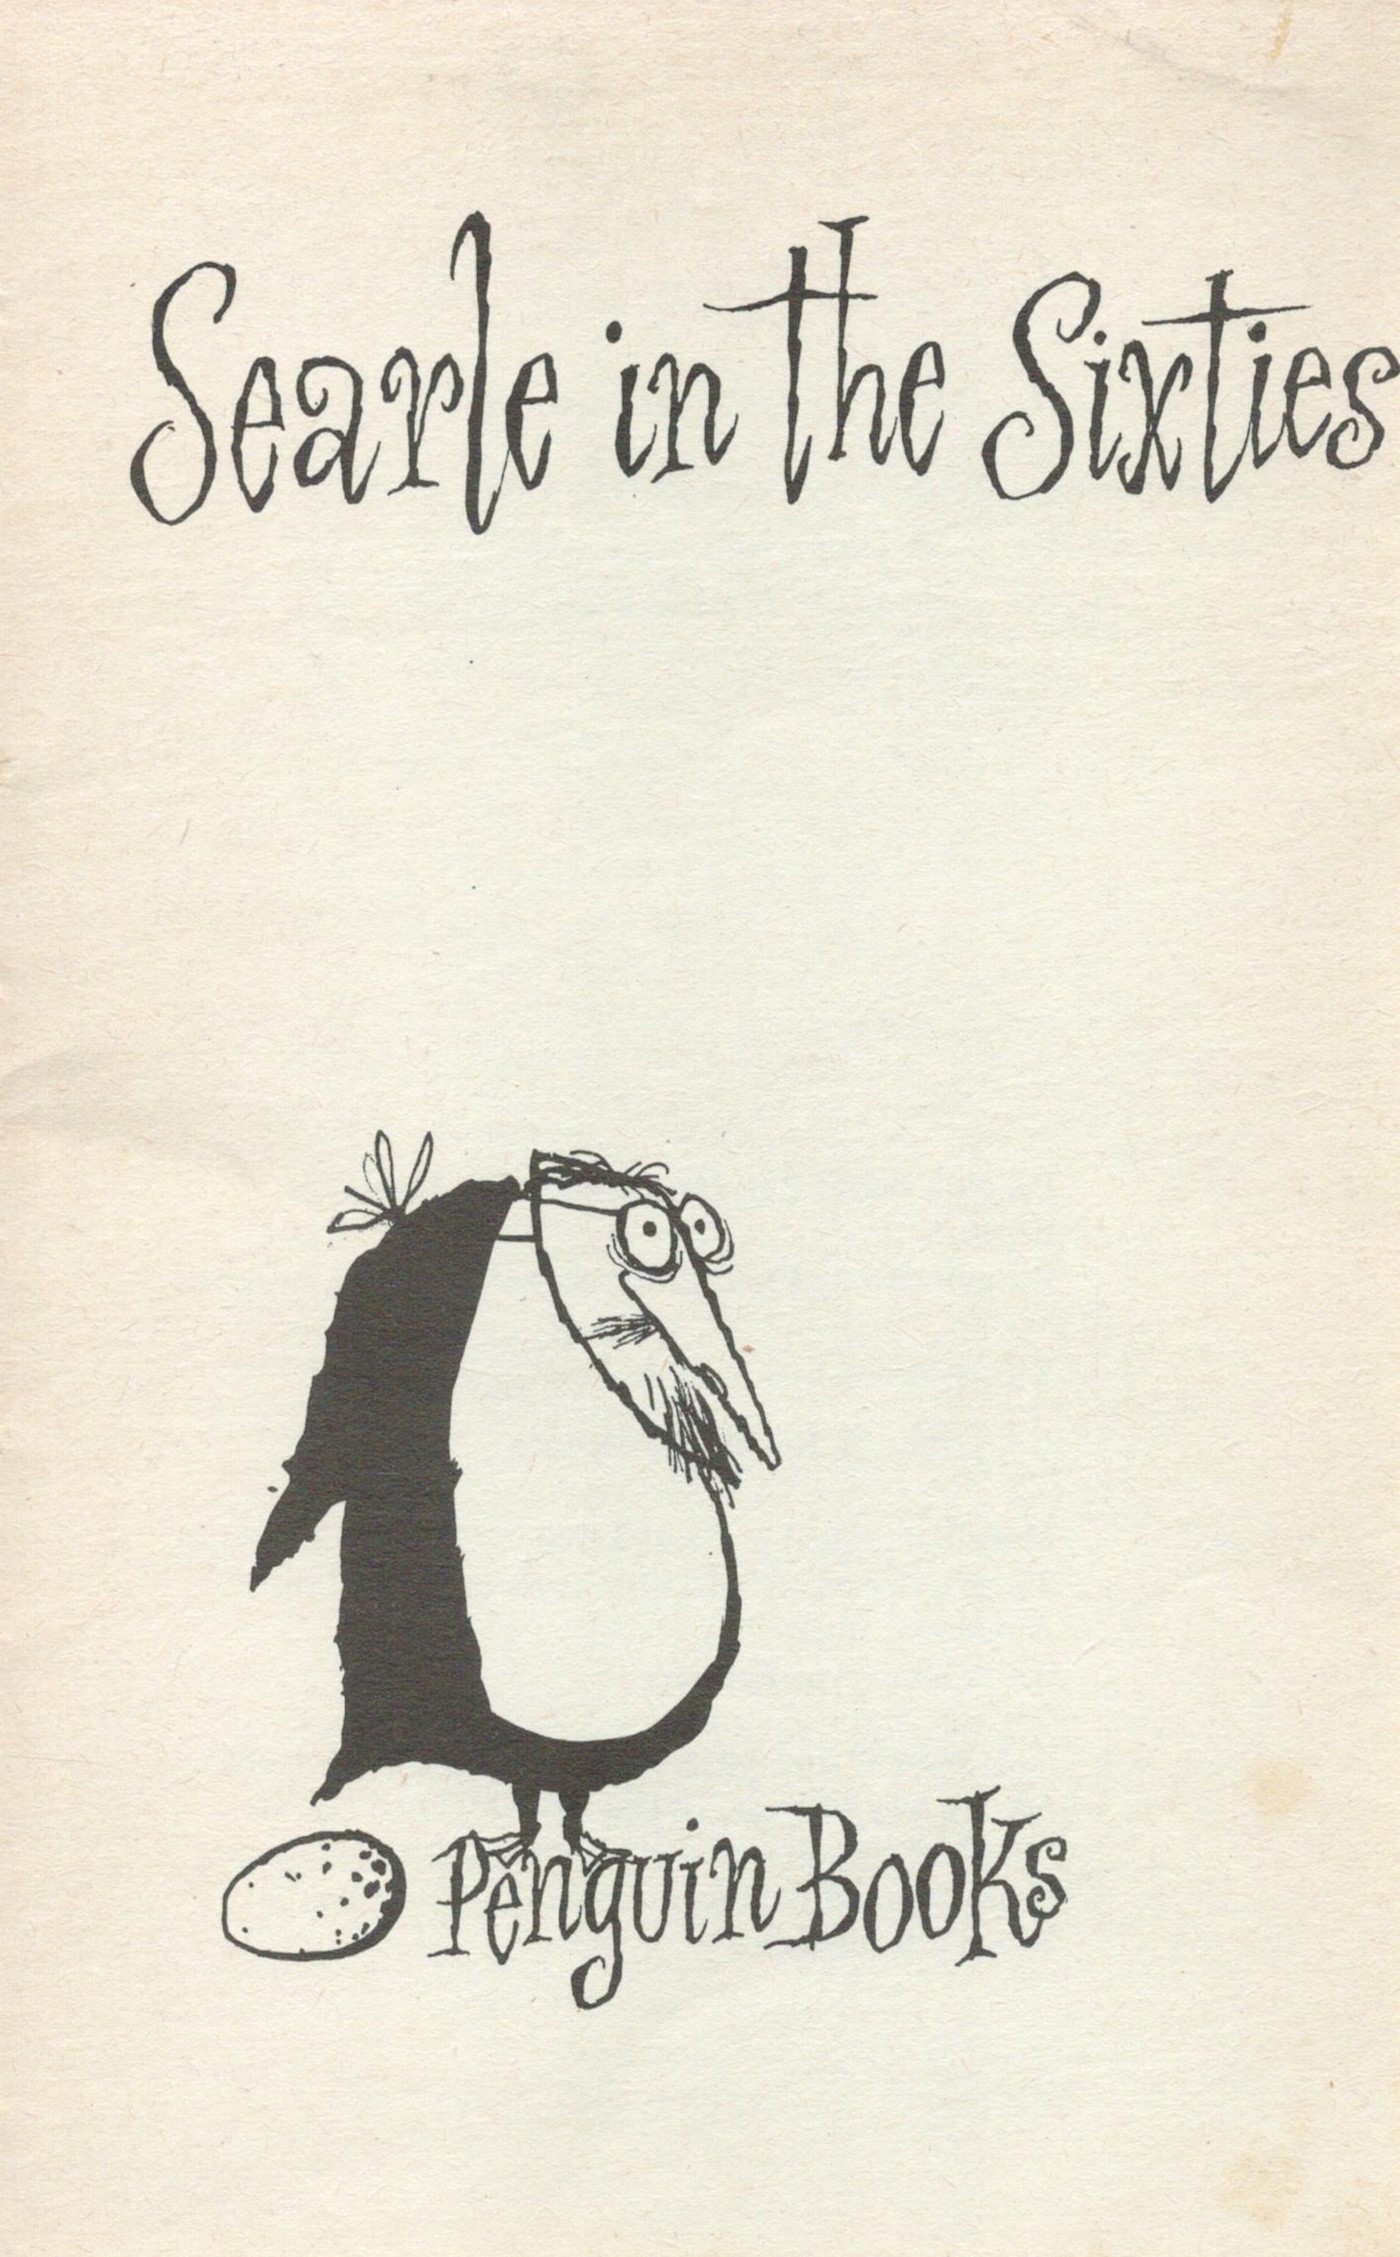 Searle in the Sixties by Ronald Searle Softback Book 1964 First Edition published by Penguin Books - Image 2 of 3